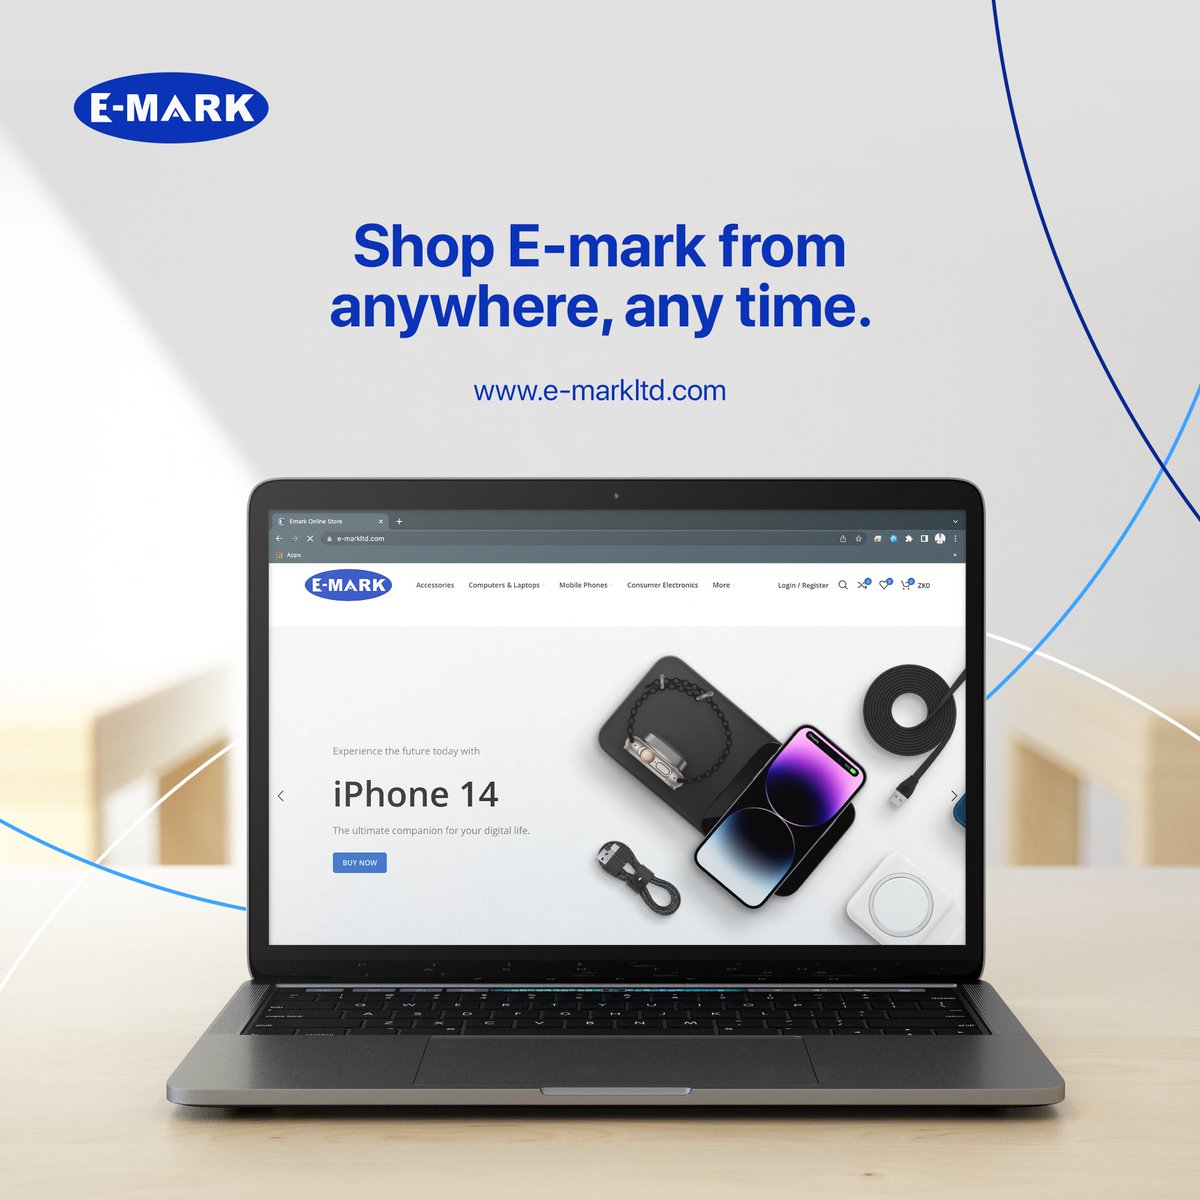 Did you know you that you could shop with us from anywhere at any given time?

Shop from your comfort at E-Mark
e-markltd.com 

#OnlineShopping 
#easyshopping
#ConnectingPeople